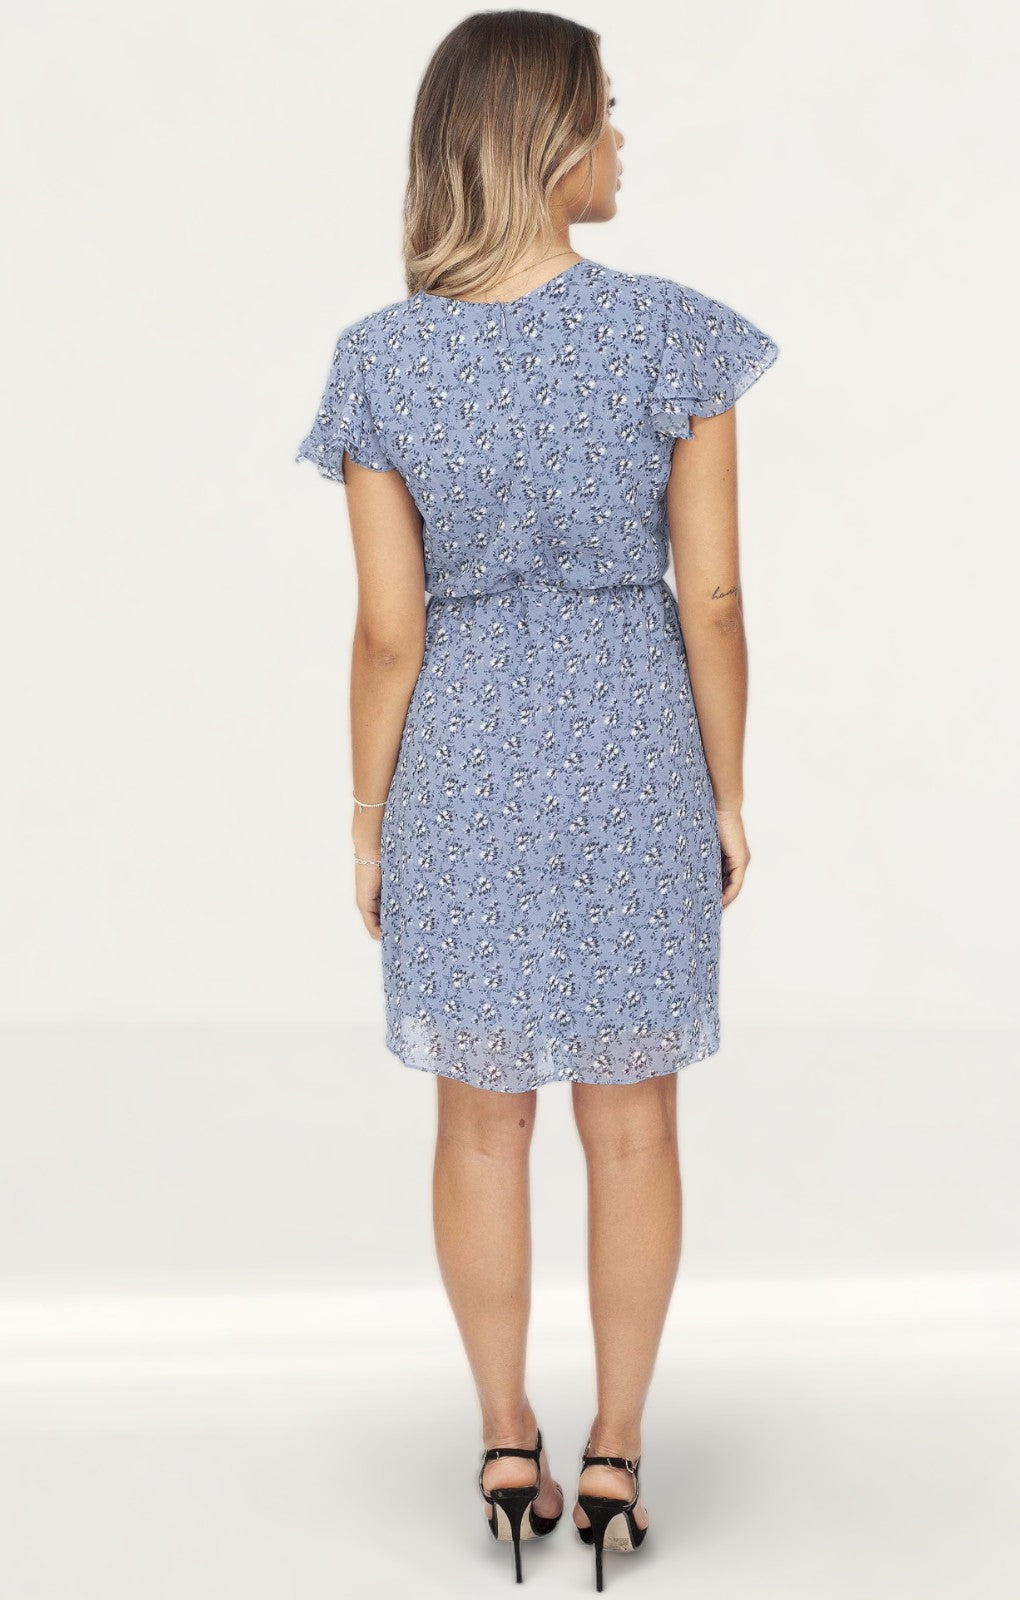 French Connection Blue Floral Belted Wrap Dress product image